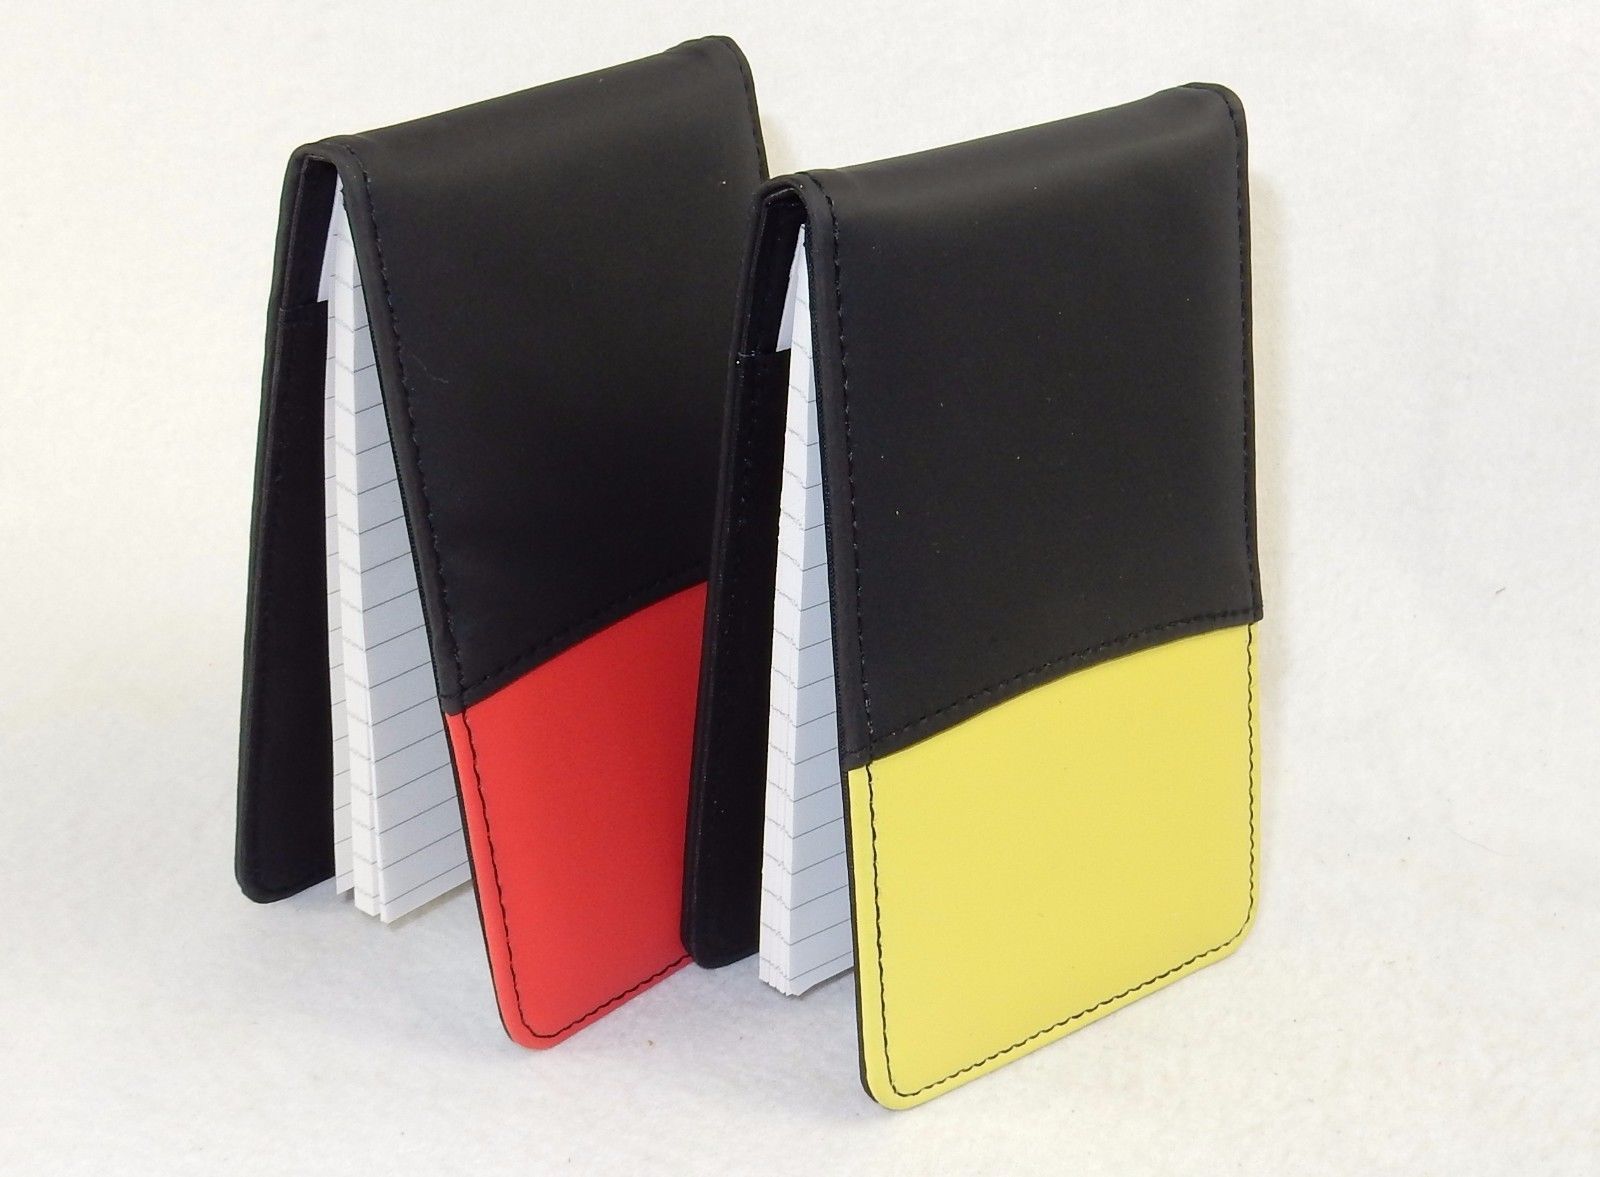 Jotter Note Pad w/Dual-Power Multi-Function Calculator ~ PO-500, Red Or Yellow - $6.95